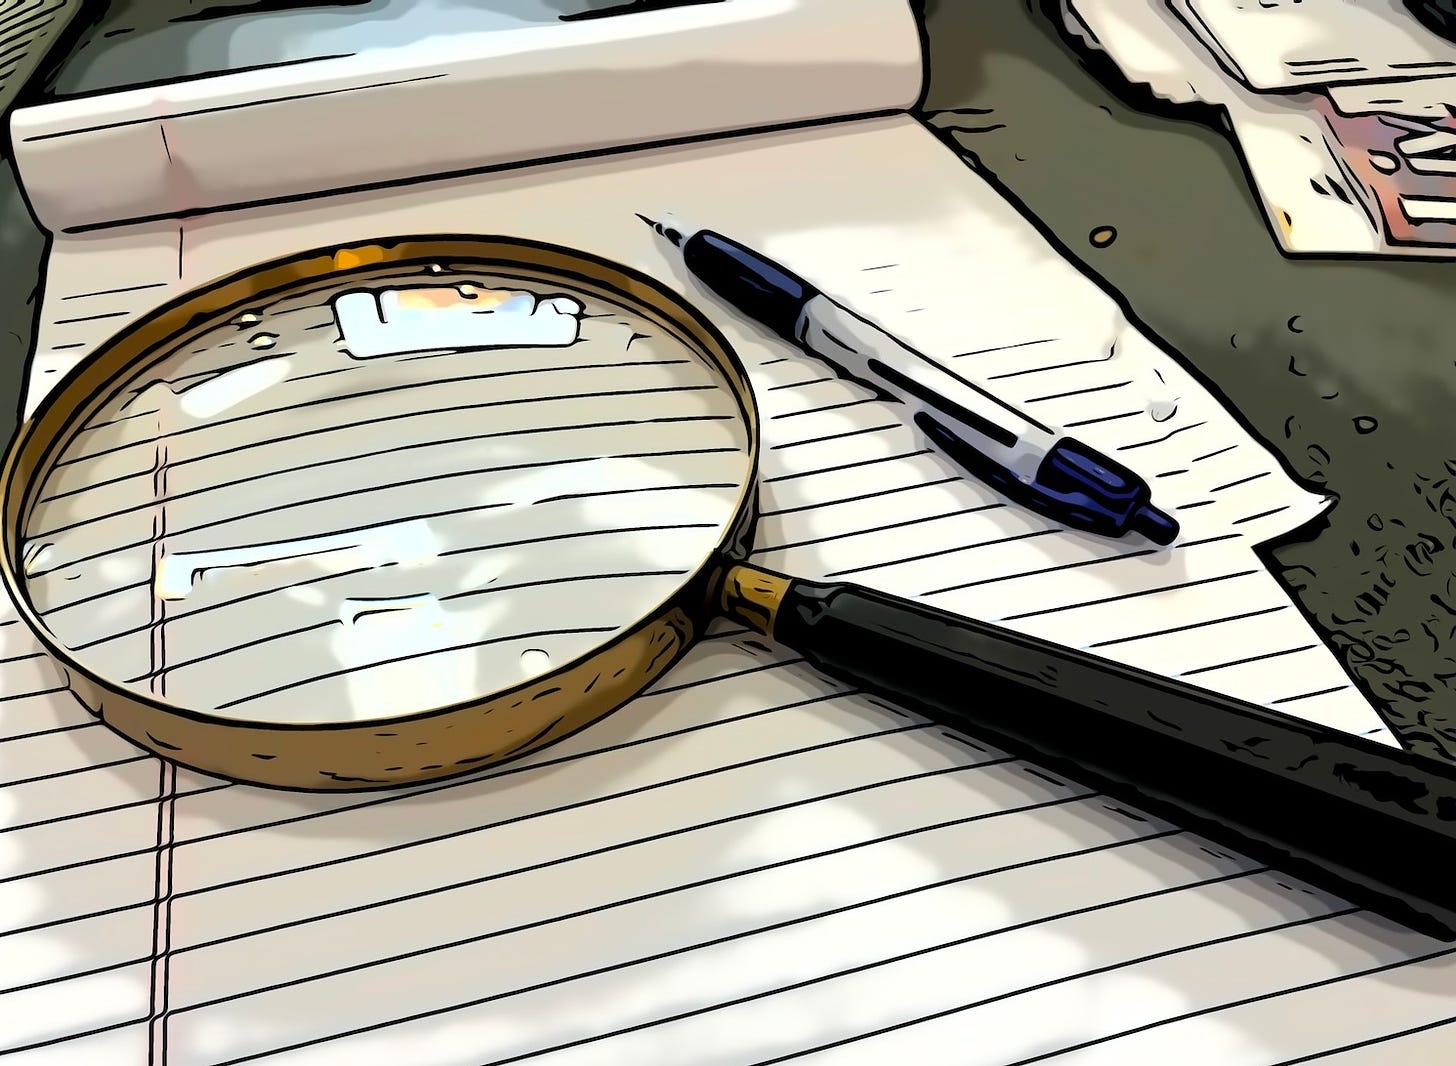 Cartoon image of magnifying glass and ballpoint pen on lined writing pad of paper